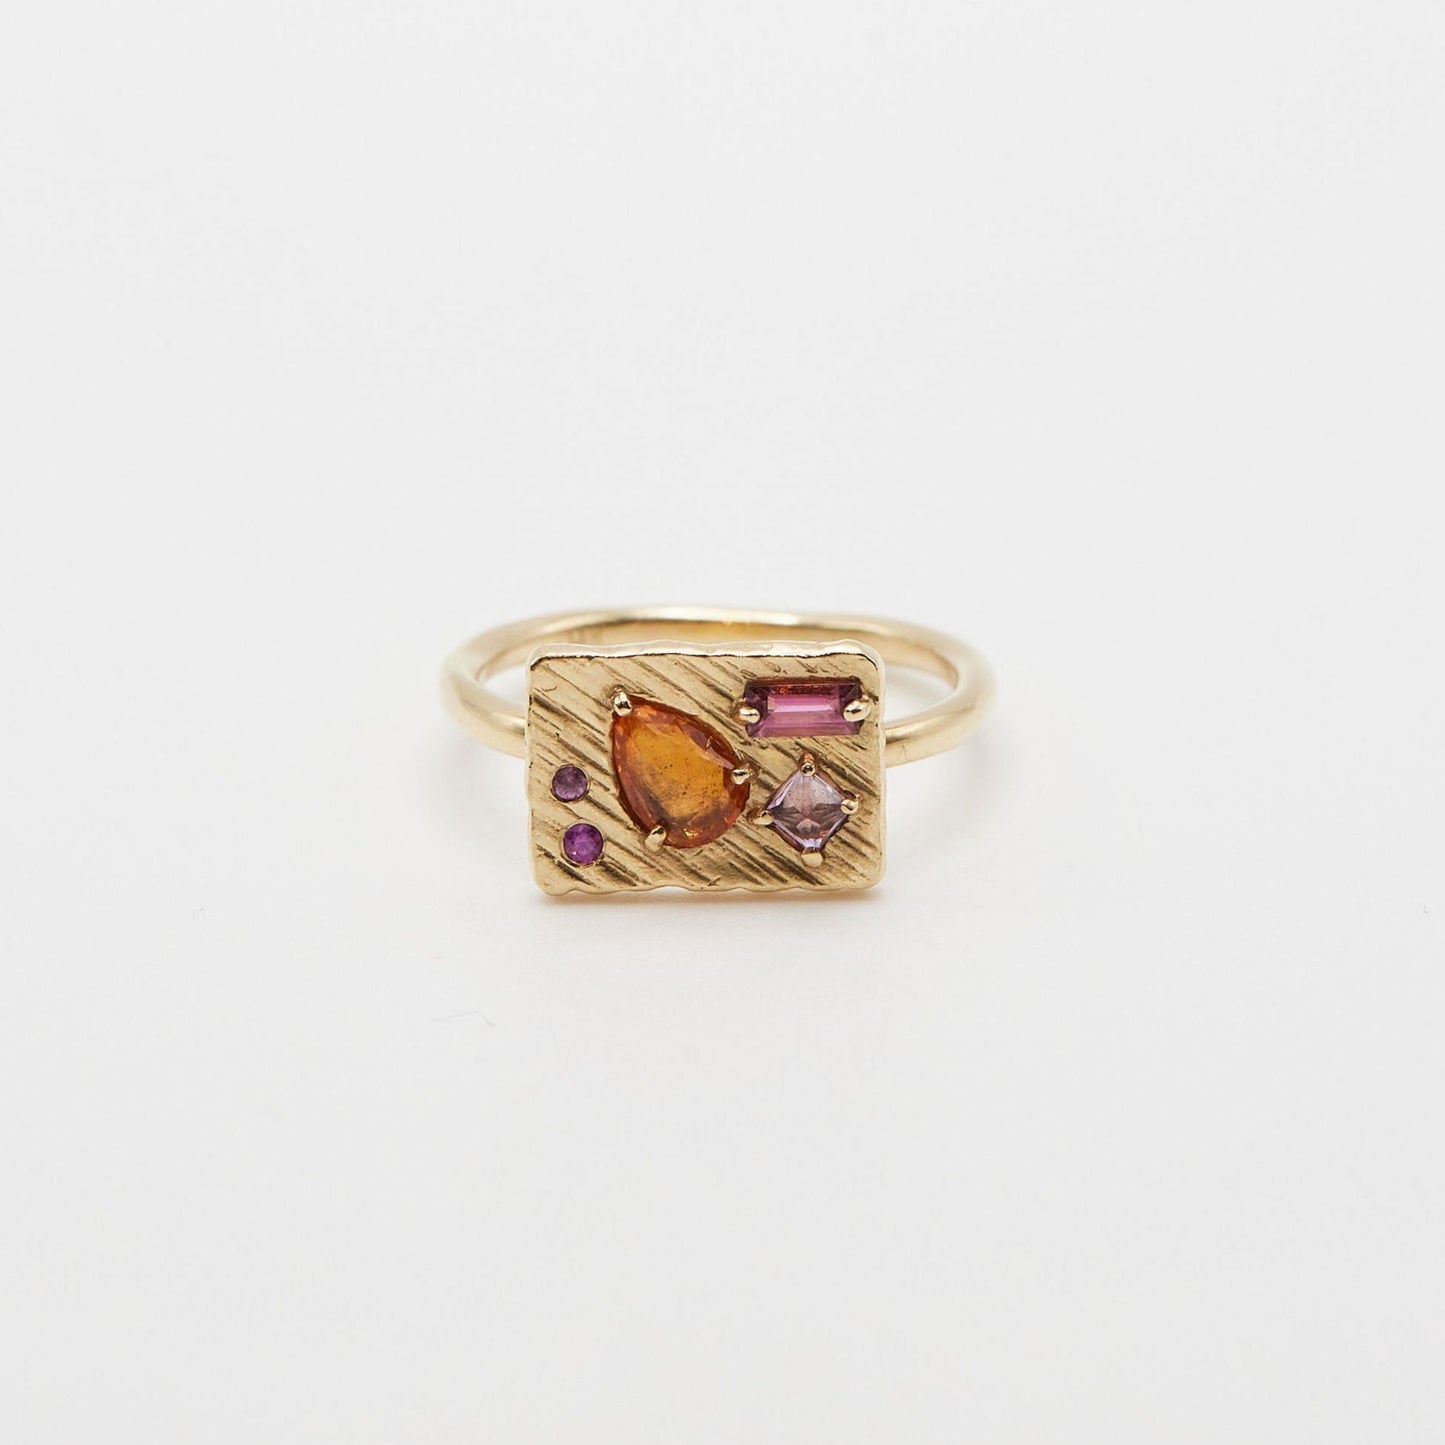 rectangle shaped gold ring with orange pear shaped stone, rectangle pink stone, and three round pink stones on white background